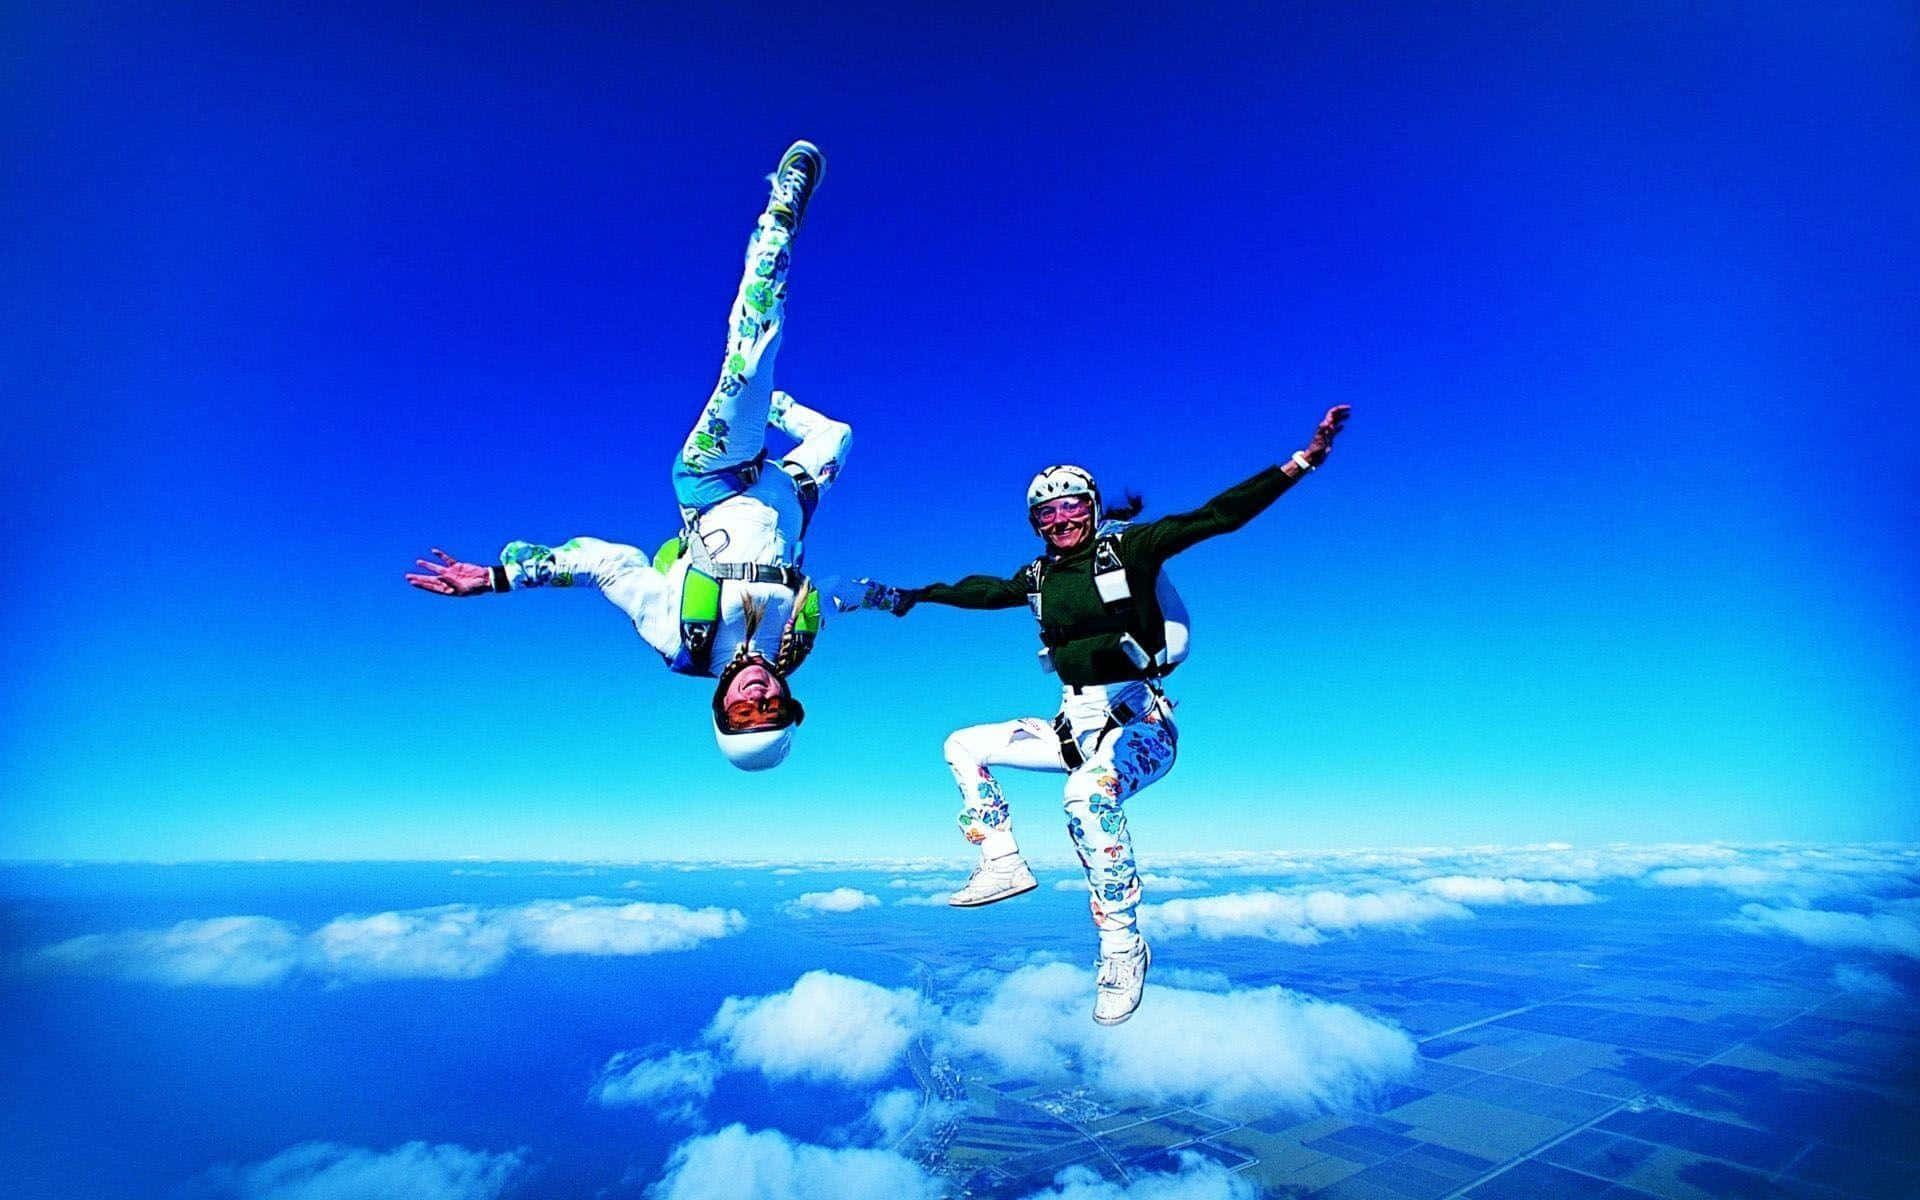 Soaring through the clouds - the thrill of skydiving